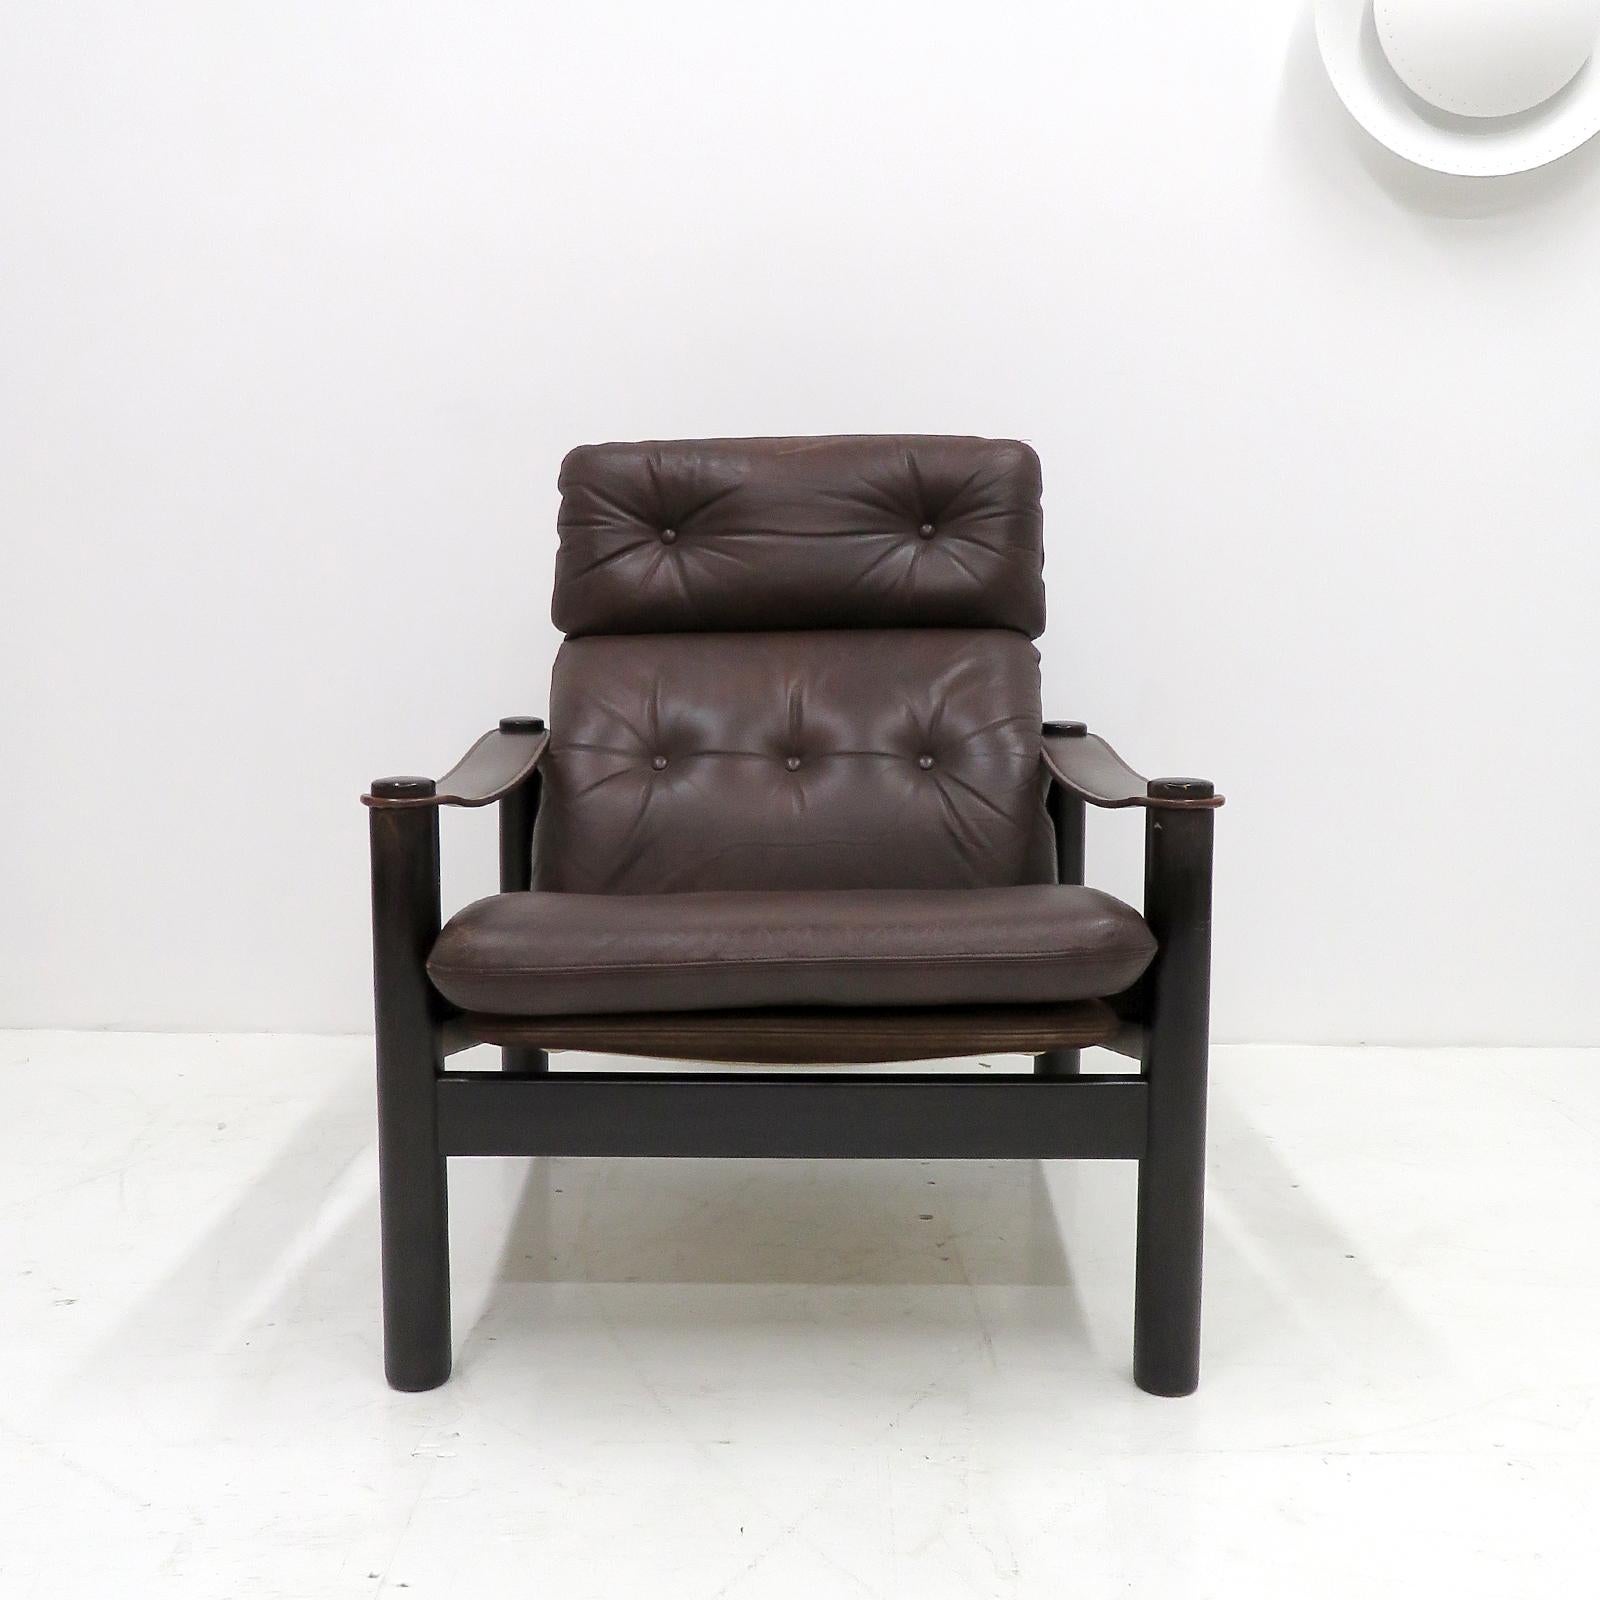 wonderful Danish leather lounge chairs 'model BEO' by Ebbe Gehl & Søren Nissen, 1970 with dark stained beech wood frame, upholstered in brown leather and the back in nubuck leather, manufactured by Jeki Møbler Bramming.